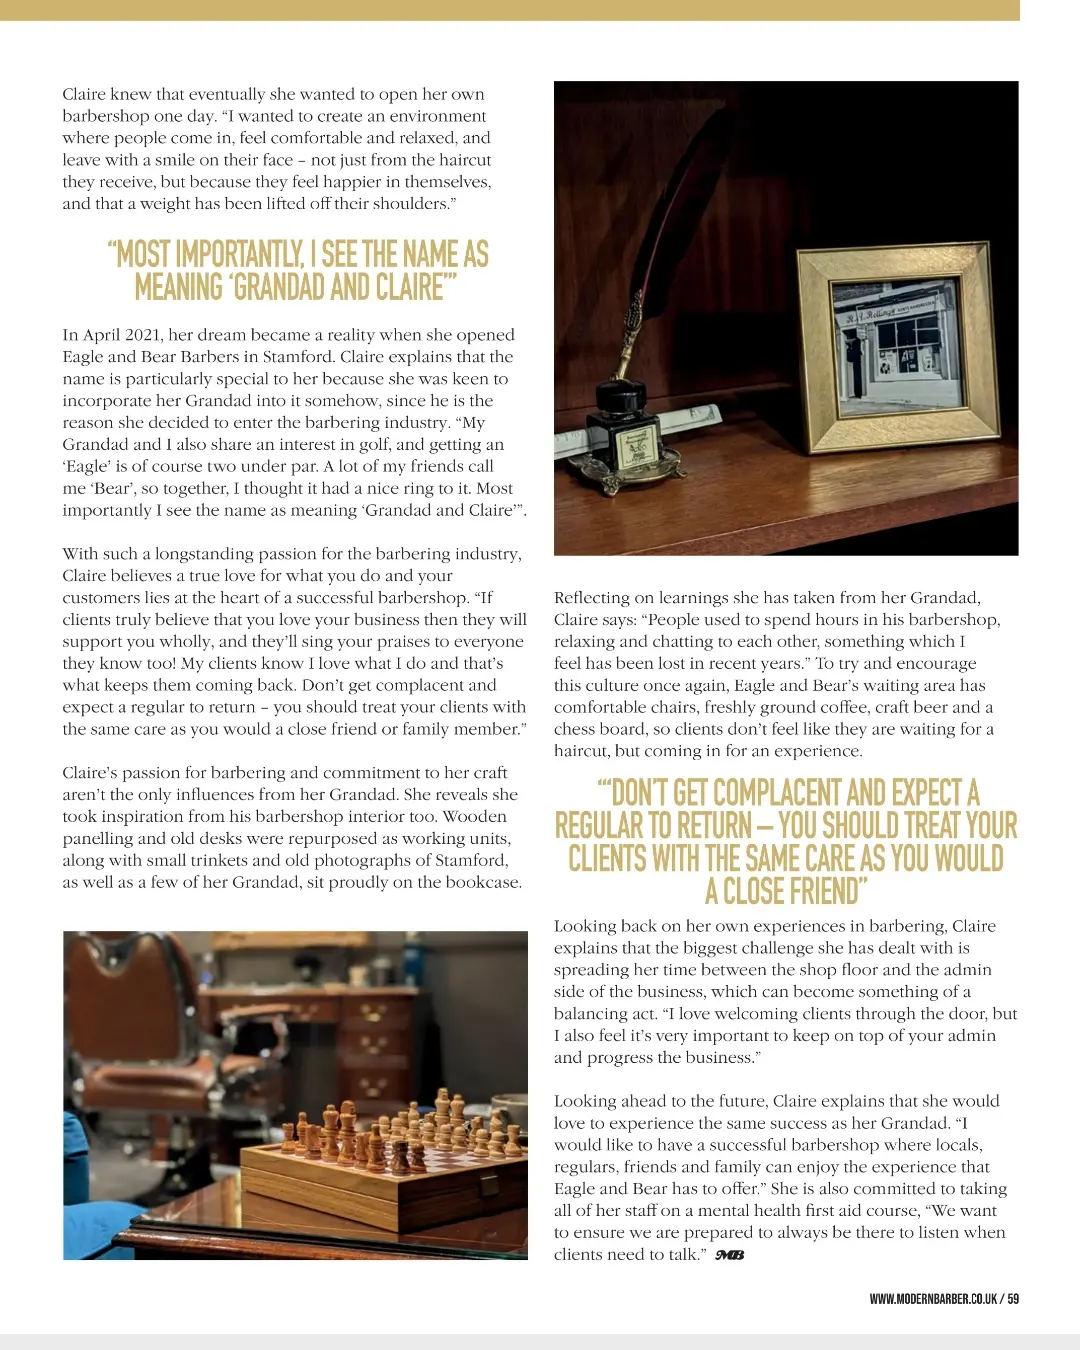 Eagle & Bear In Modern Barber Magazine - Article Page 2